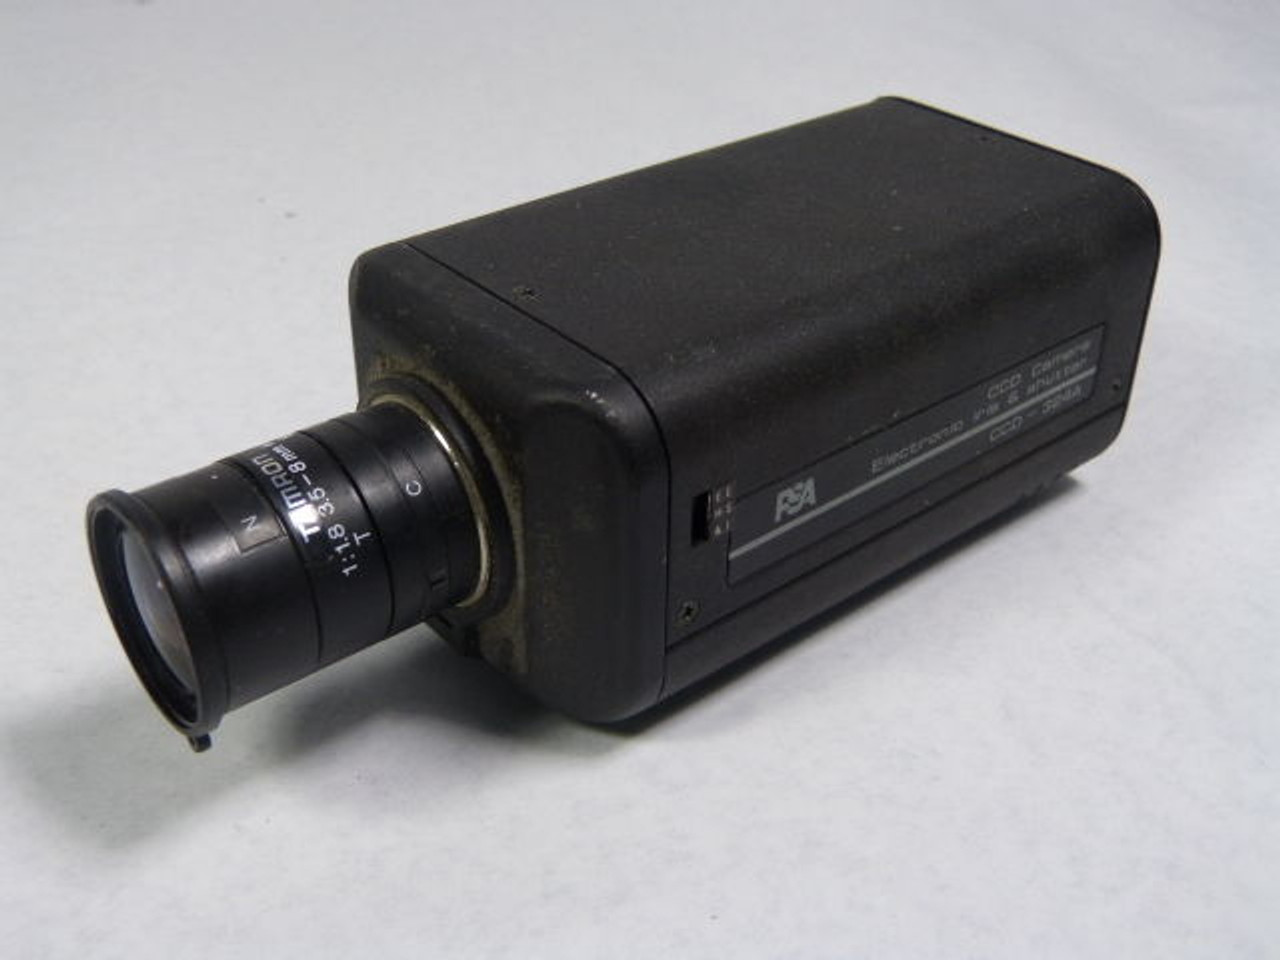 PSA CCD-324A Monochrome CCD Camera Electronic Iris & Shutter 3.5-8mm Lens USED